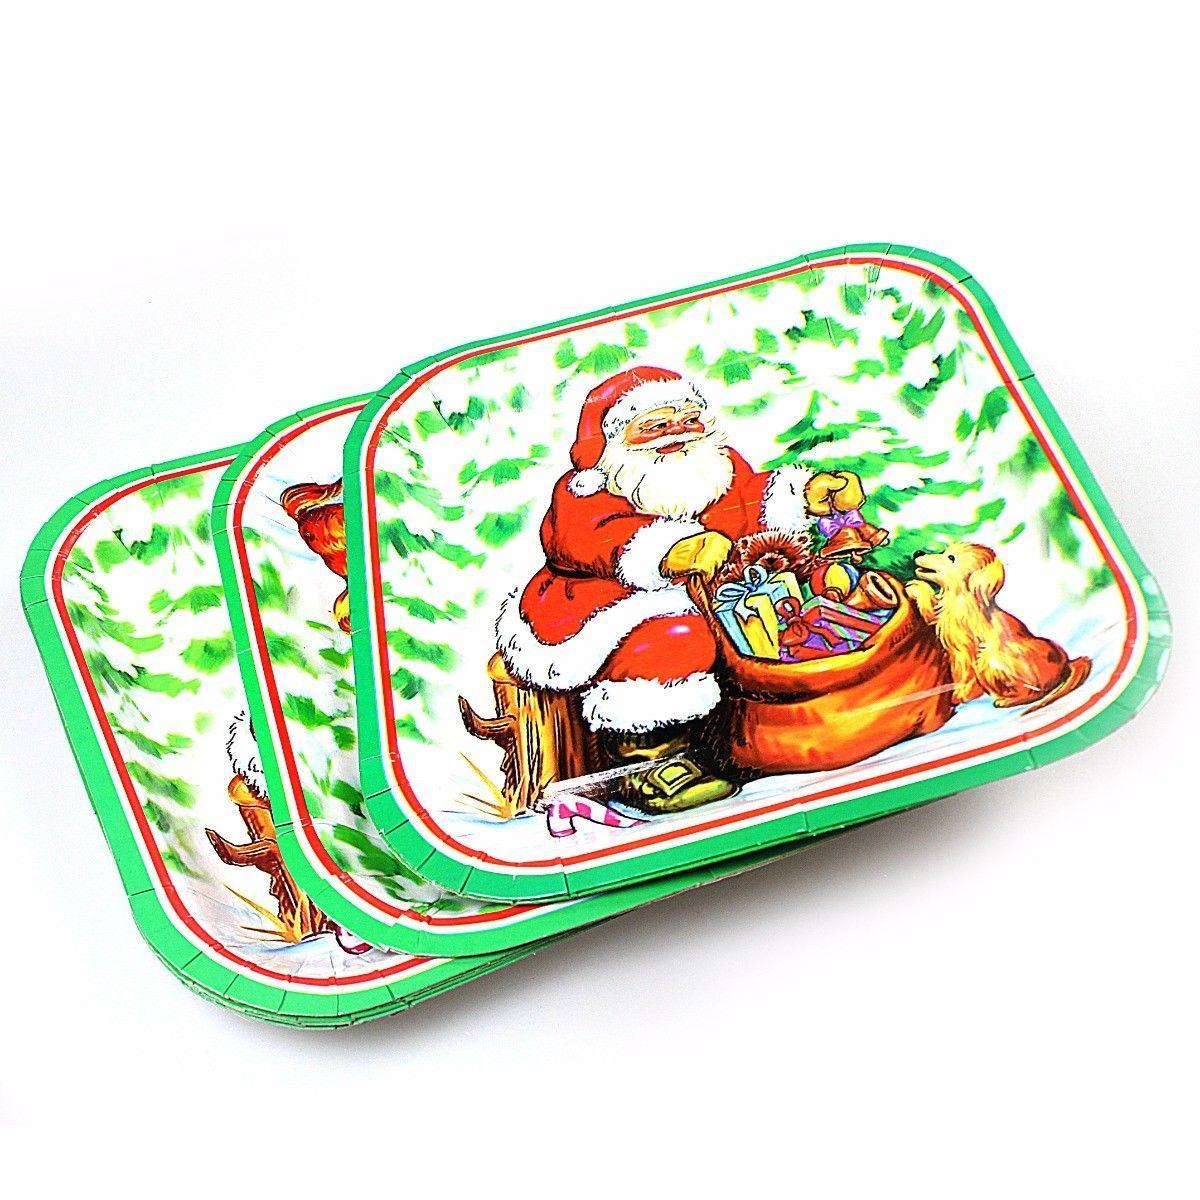 Pack of Christmas Party Paper Plates Medium 23 cm Assorted Designs 1672 (Large Letter)